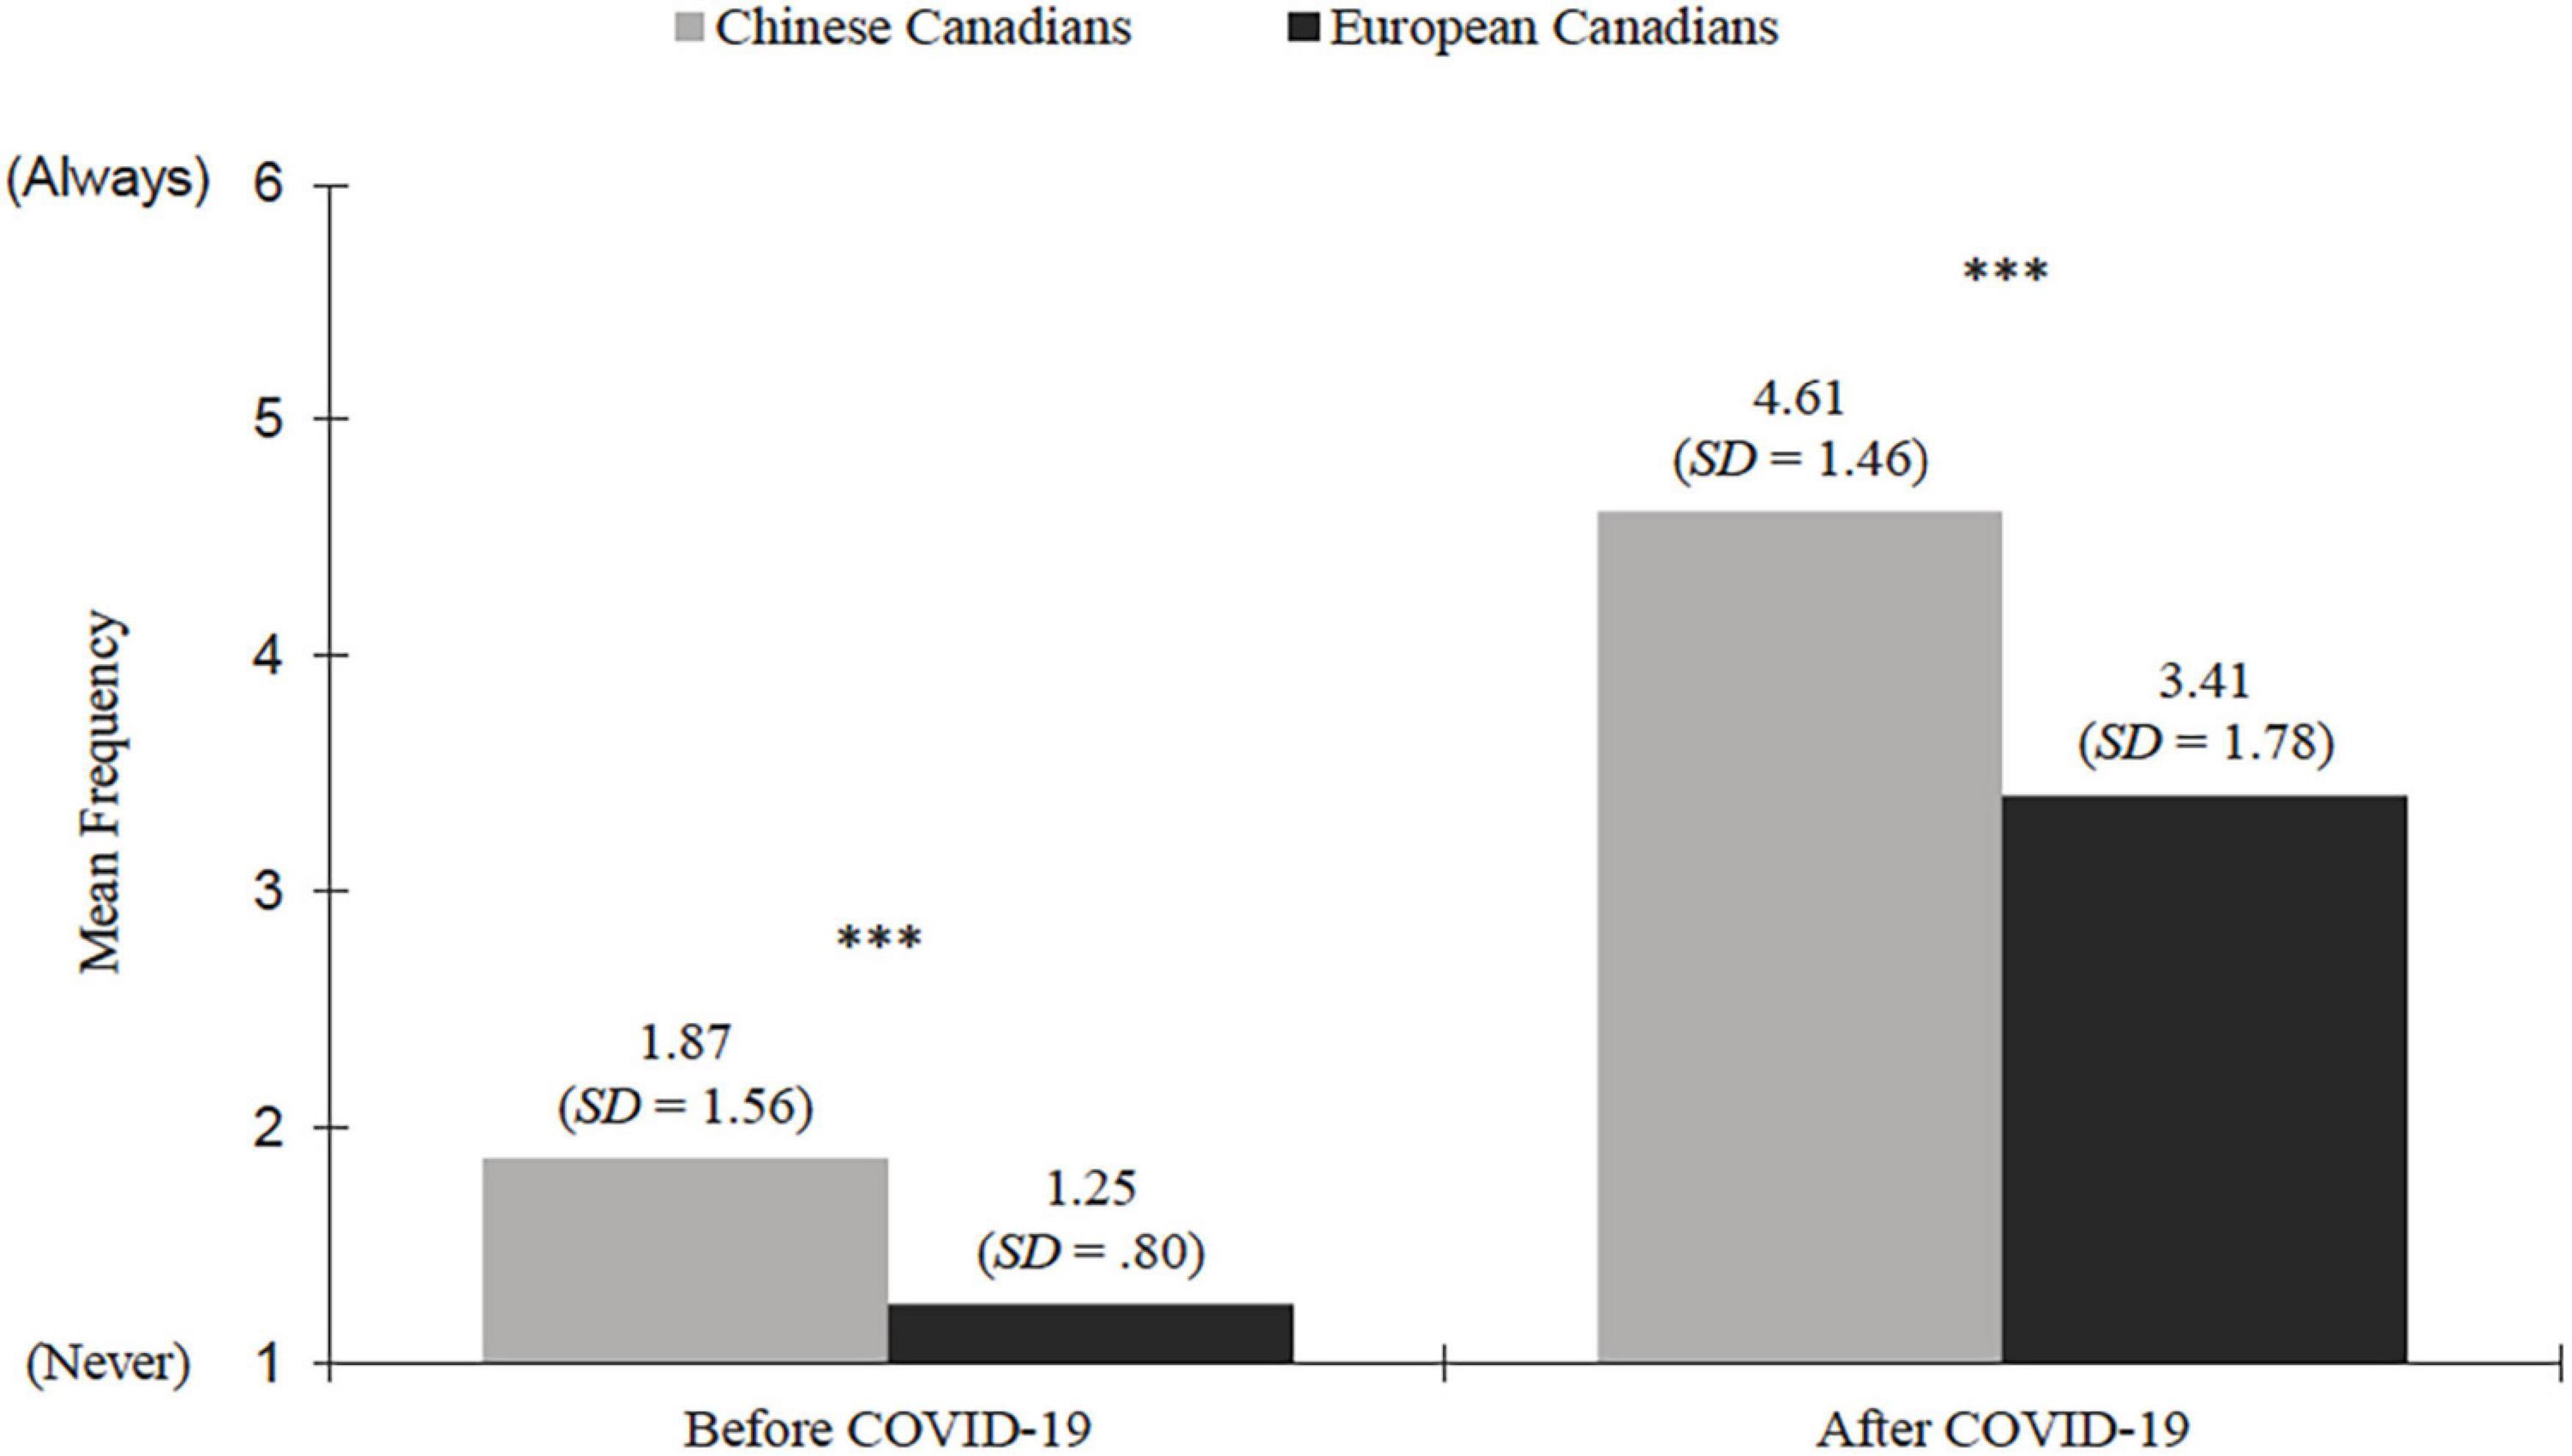 Frontiers | “Responsible” or “Strange?” Differences in Face Mask Attitudes and Use Between and Asian Canadians During COVID-19's Wave